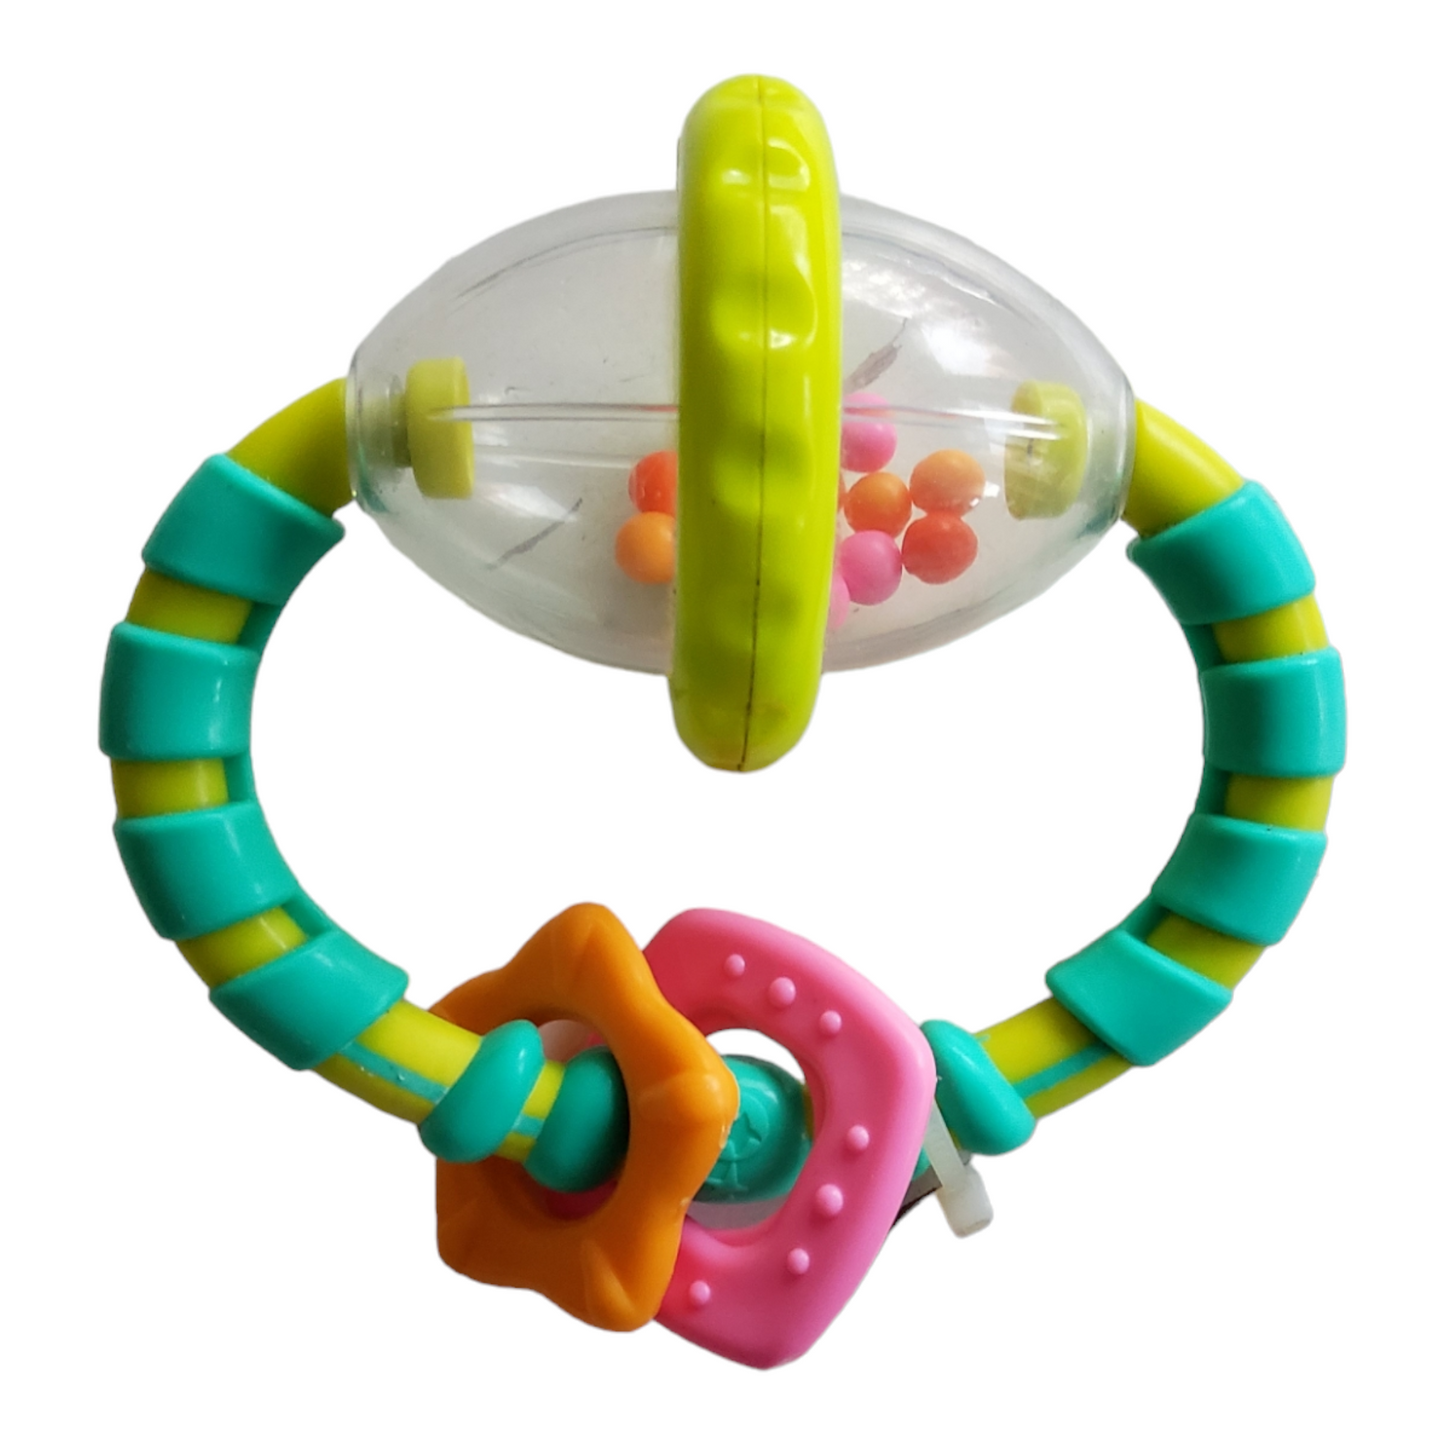 Bright Starts - Grab and Spin Rattle toy